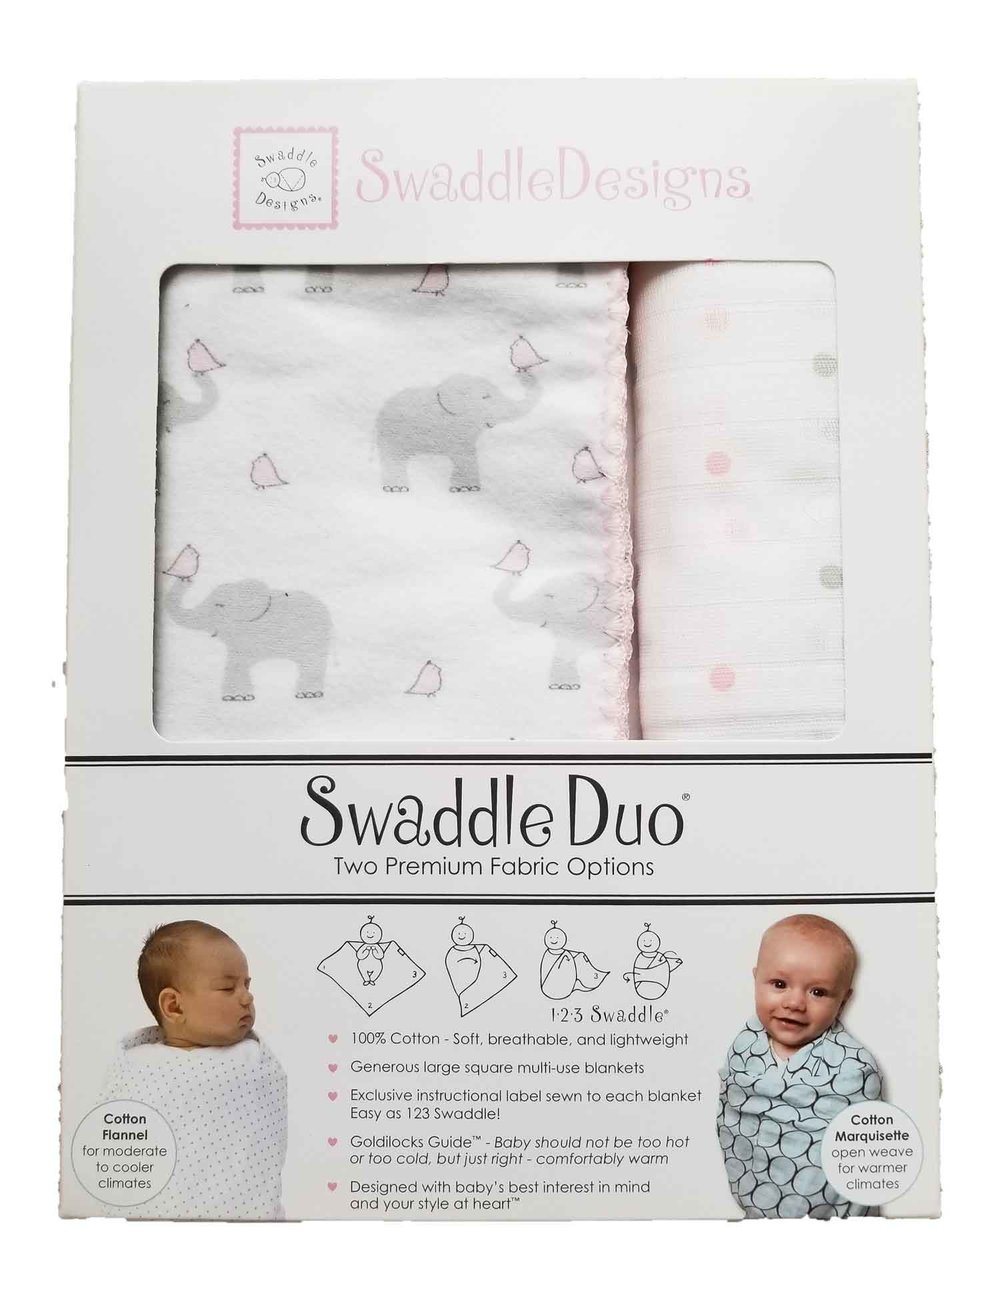 Pink Elephants And Chickies Duo Swaddling Set By Swaddle Designs Pink Elephants And Chickies Duo Swaddling Set By Swaddle Designs